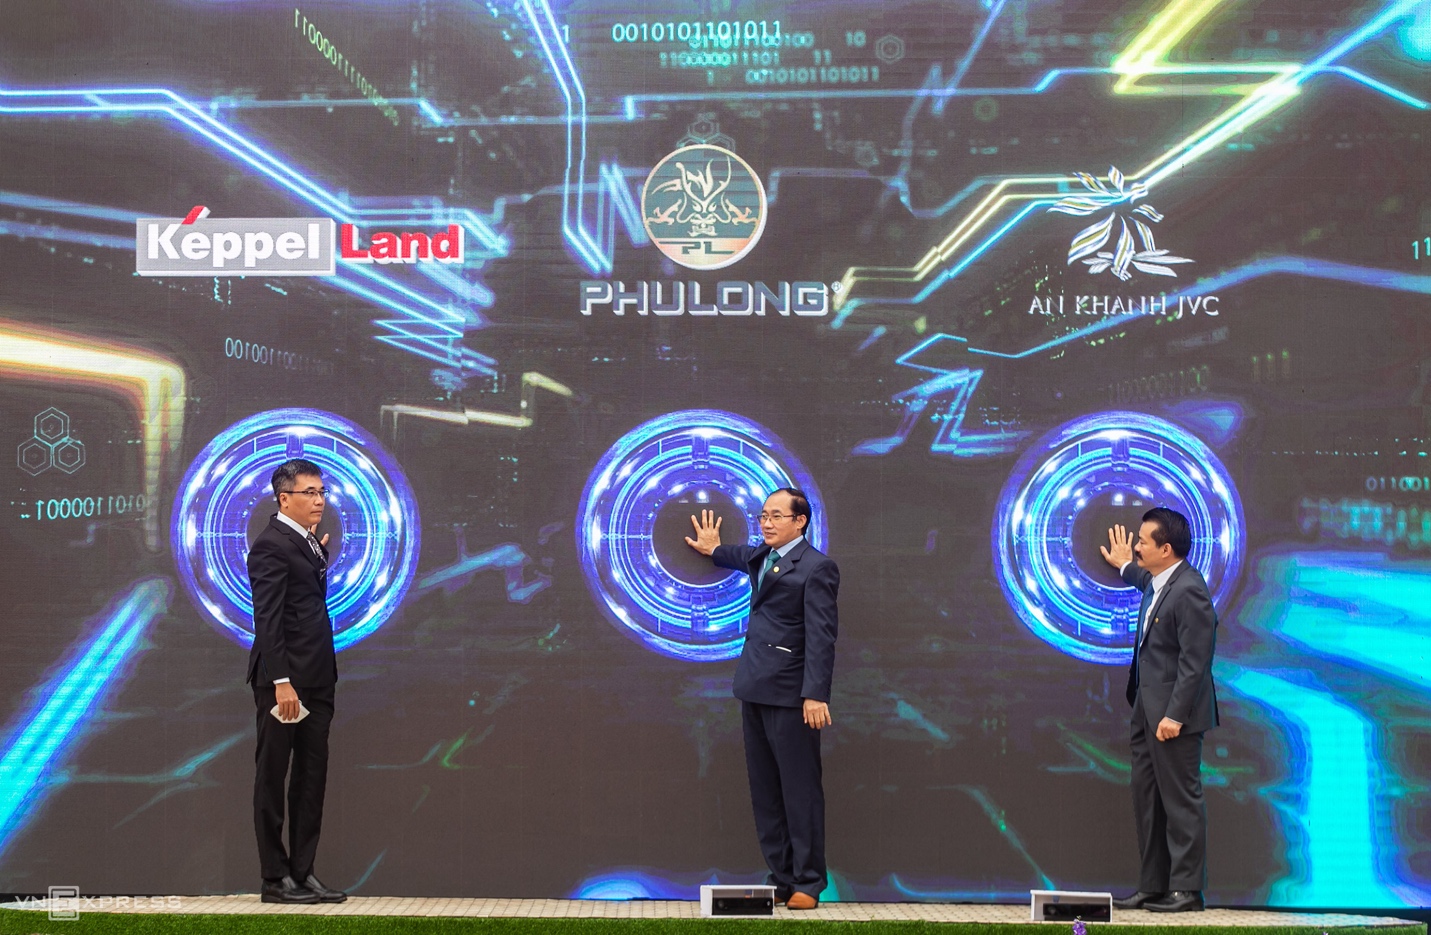 A group of men standing in front of a large screen

Description automatically generated with medium confidence